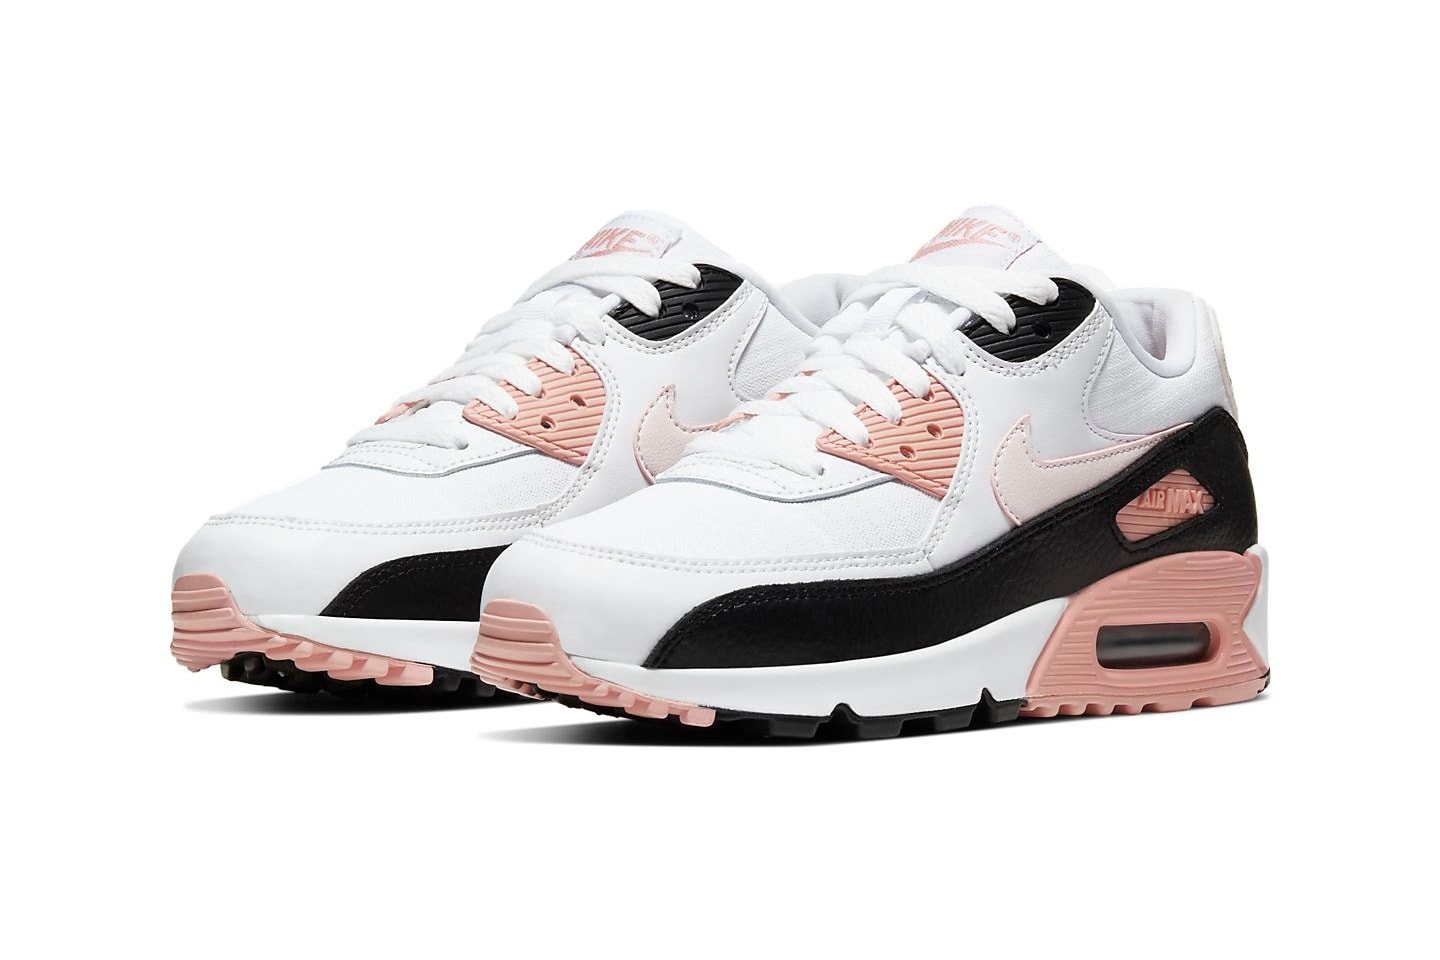 Nike Air Max 90 Monochrome Light Soft Pink Coral Stardust Black White Sneakers Trainers Women's